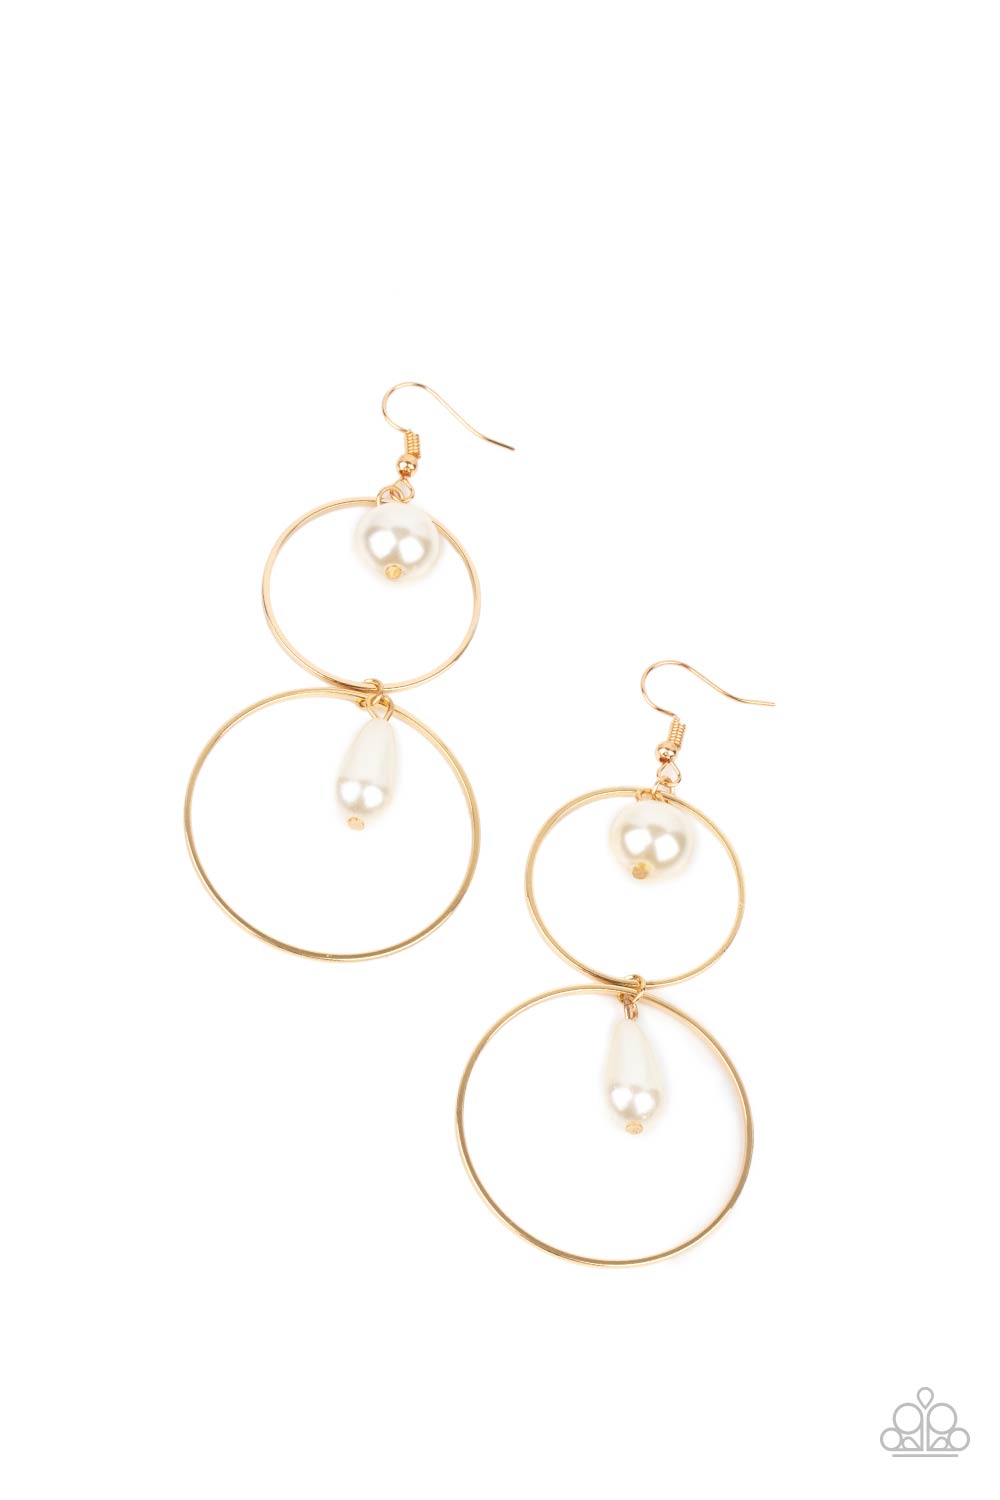 ​Cultured in Couture - White Pearl and Gold Earrings - Paparazzi Accessories - A classic white pearl swings from the top of a shiny gold hoop that is linked to another gold hoop by a pearly teardrop bead, creating a stunningly stacked display. Earring attaches to a standard fishhook fitting. Sold as one pair of earrings.